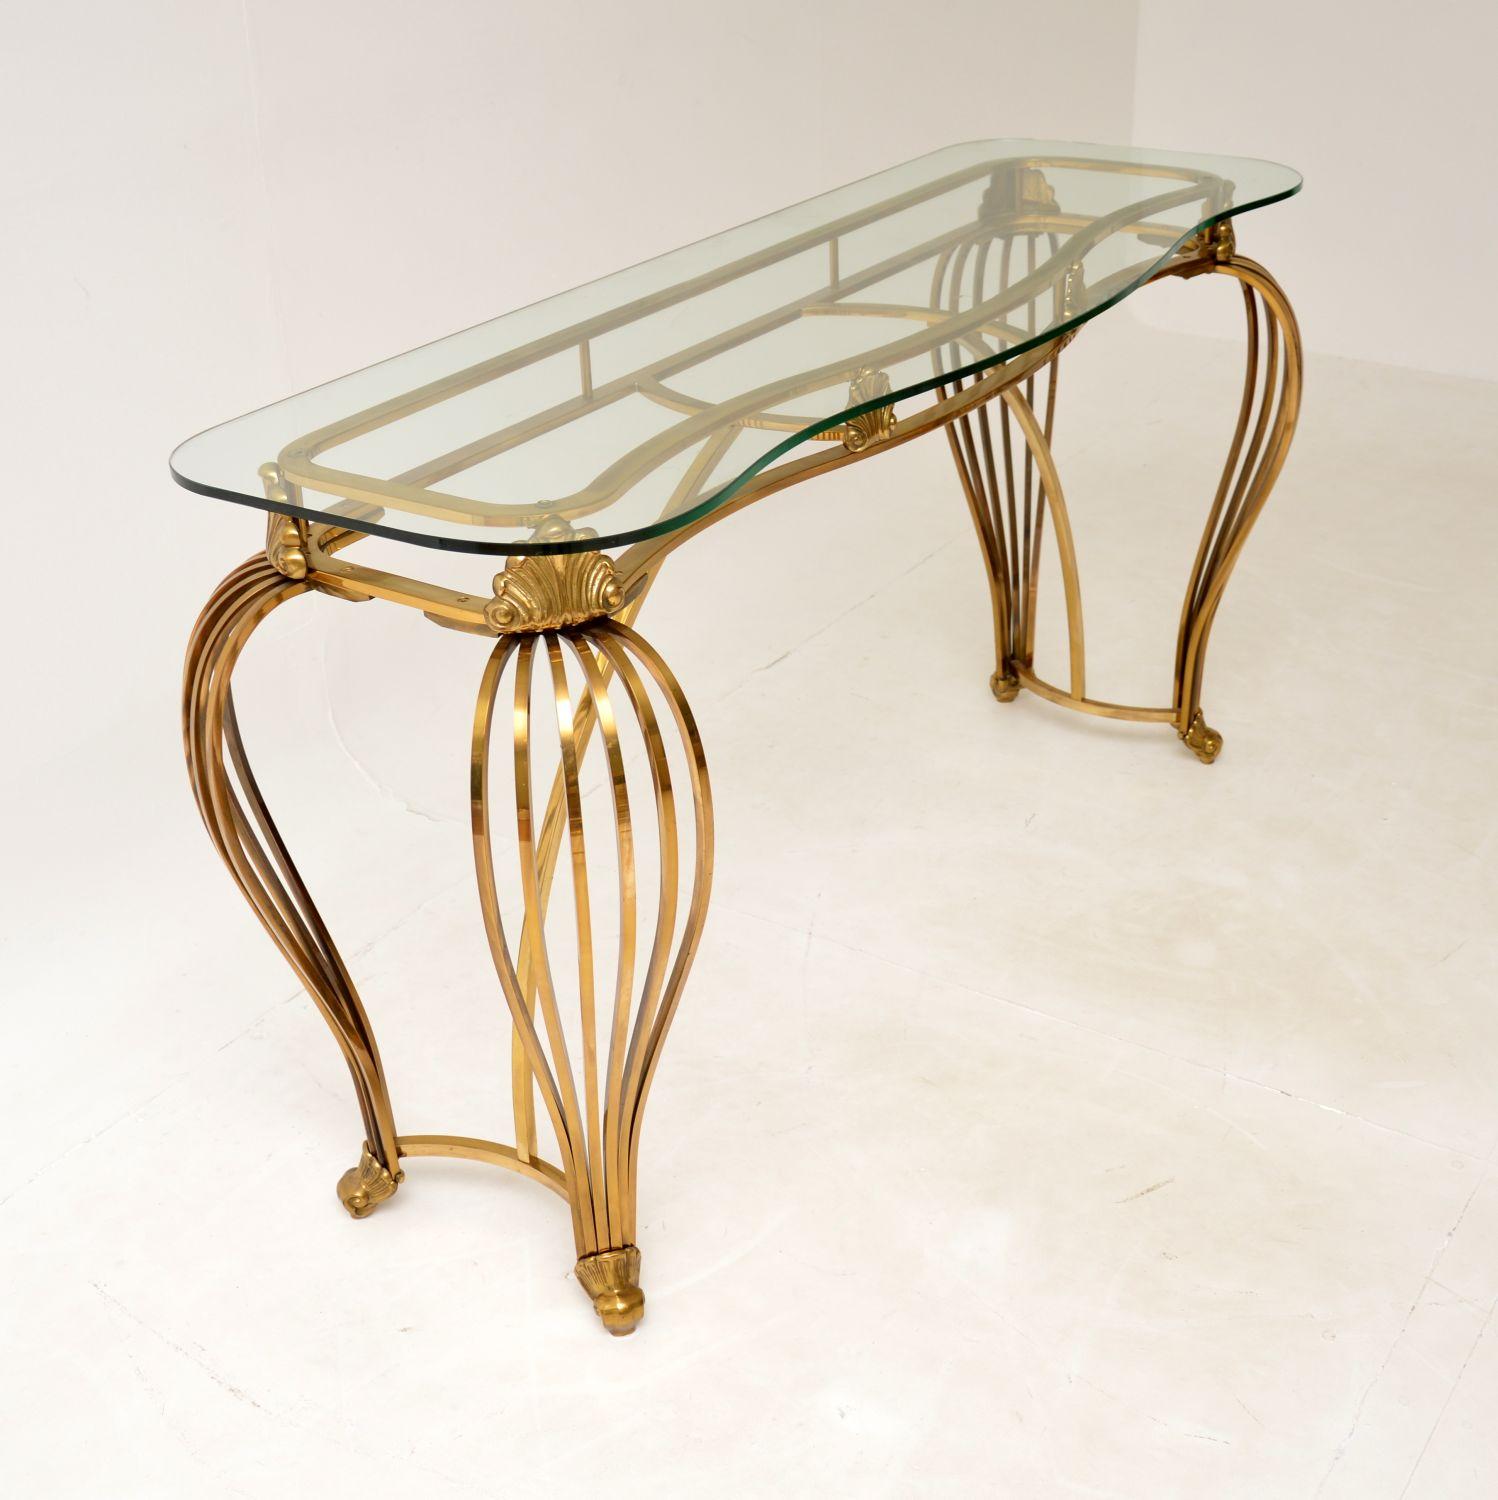 20th Century Antique French Rococo Style Solid Brass Console Table